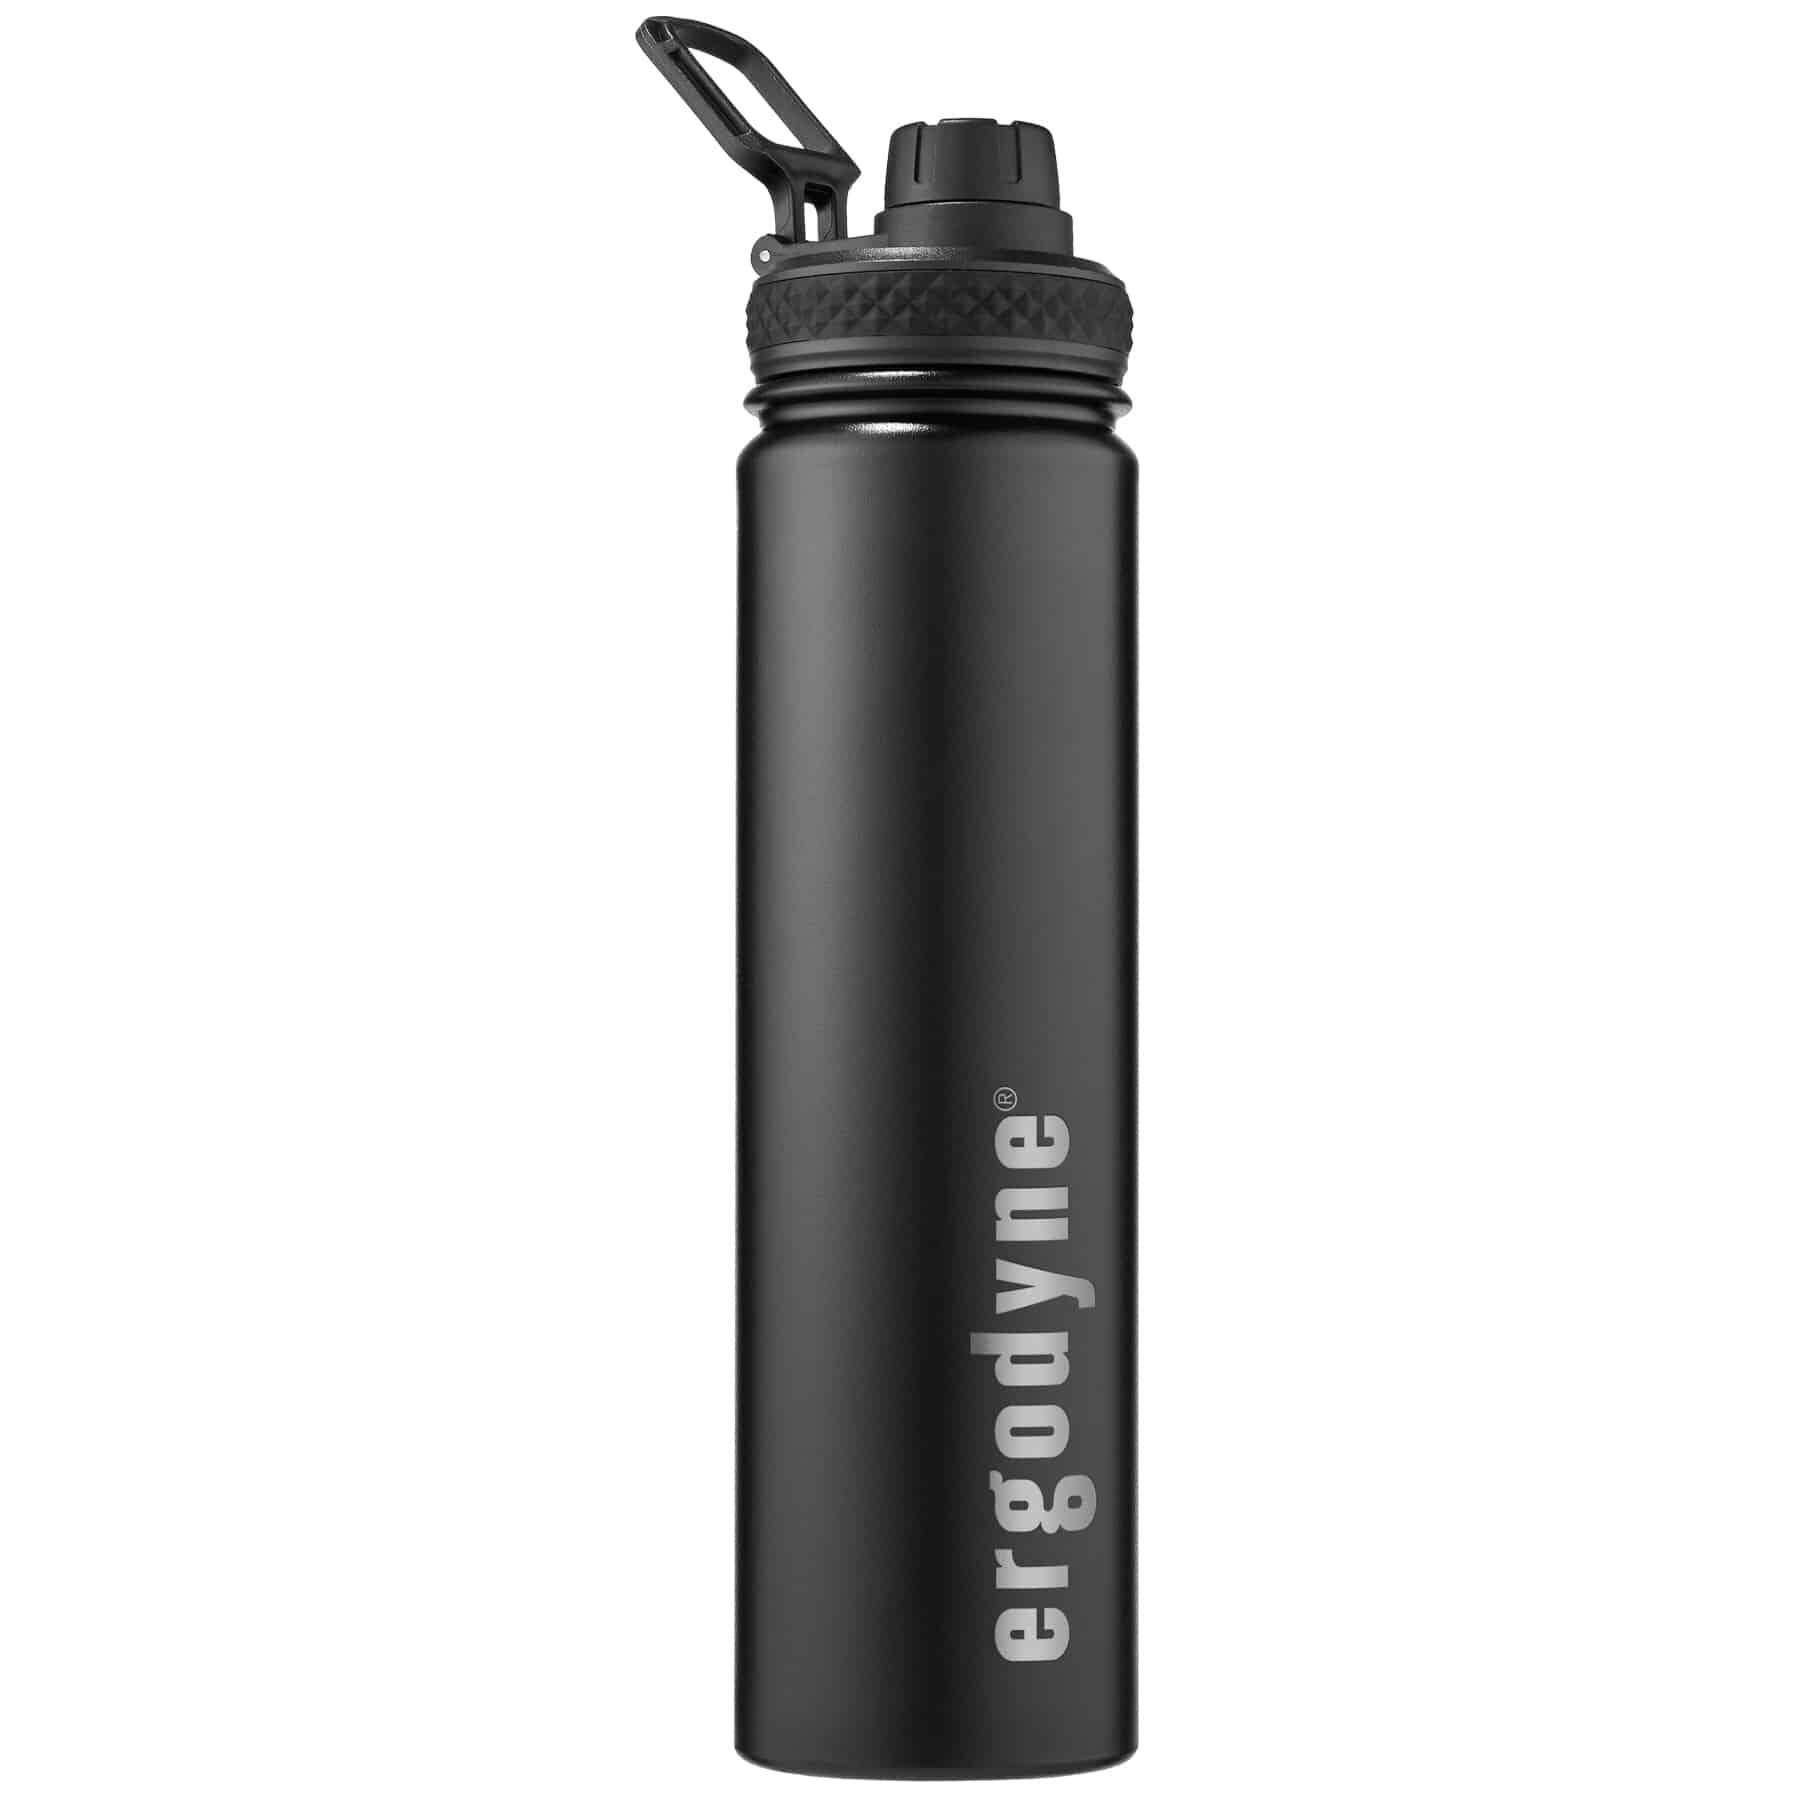 https://www.ergodyne.com/sites/default/files/product-images/13167-5152-insulated-stainless-steel-water-bottle-black-front.jpg